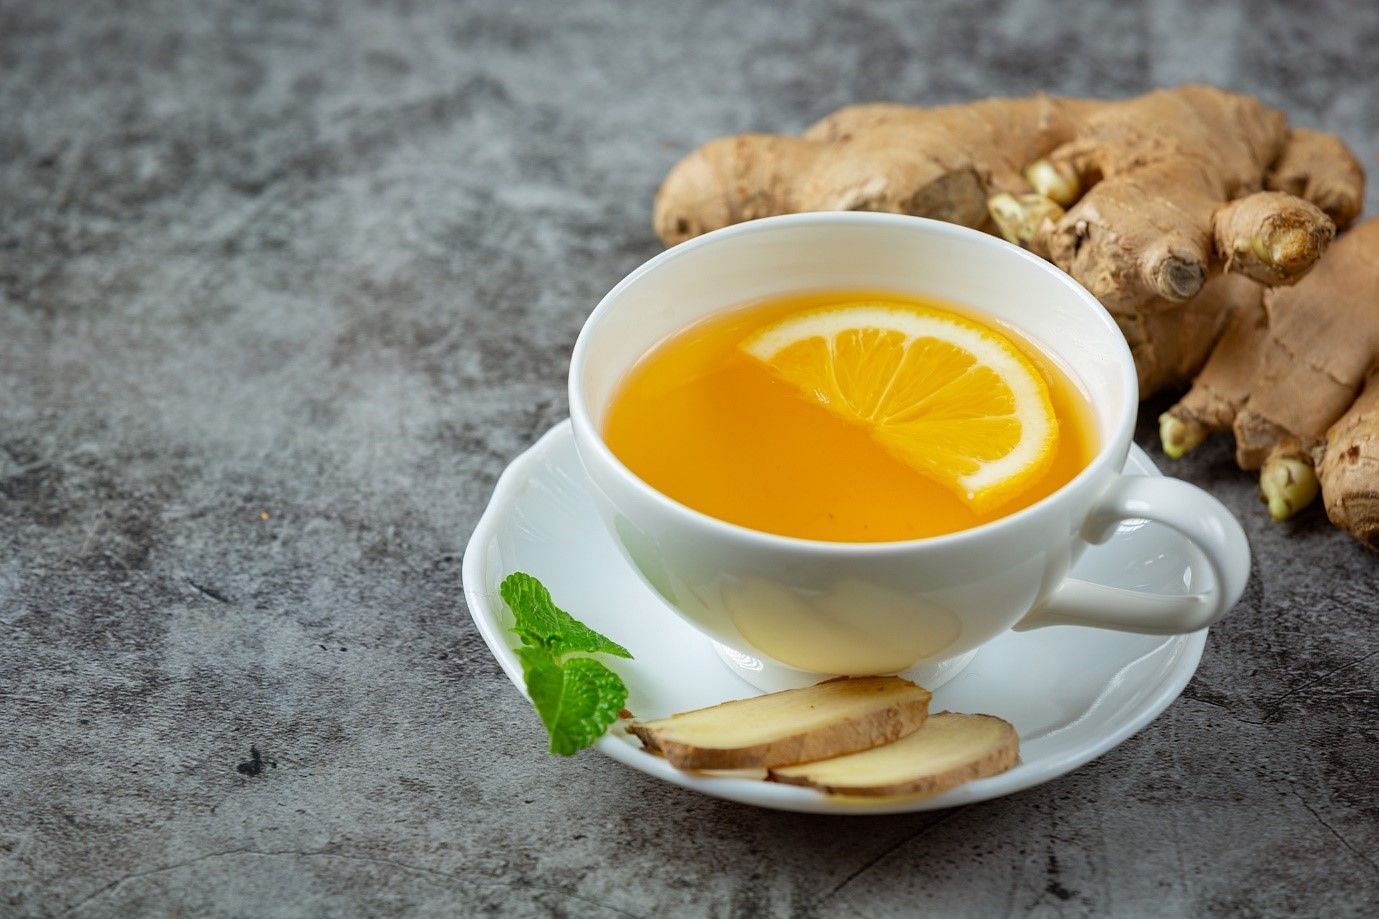 Ginger can ease stomach discomfort (Image by Jcomp on Freepik)